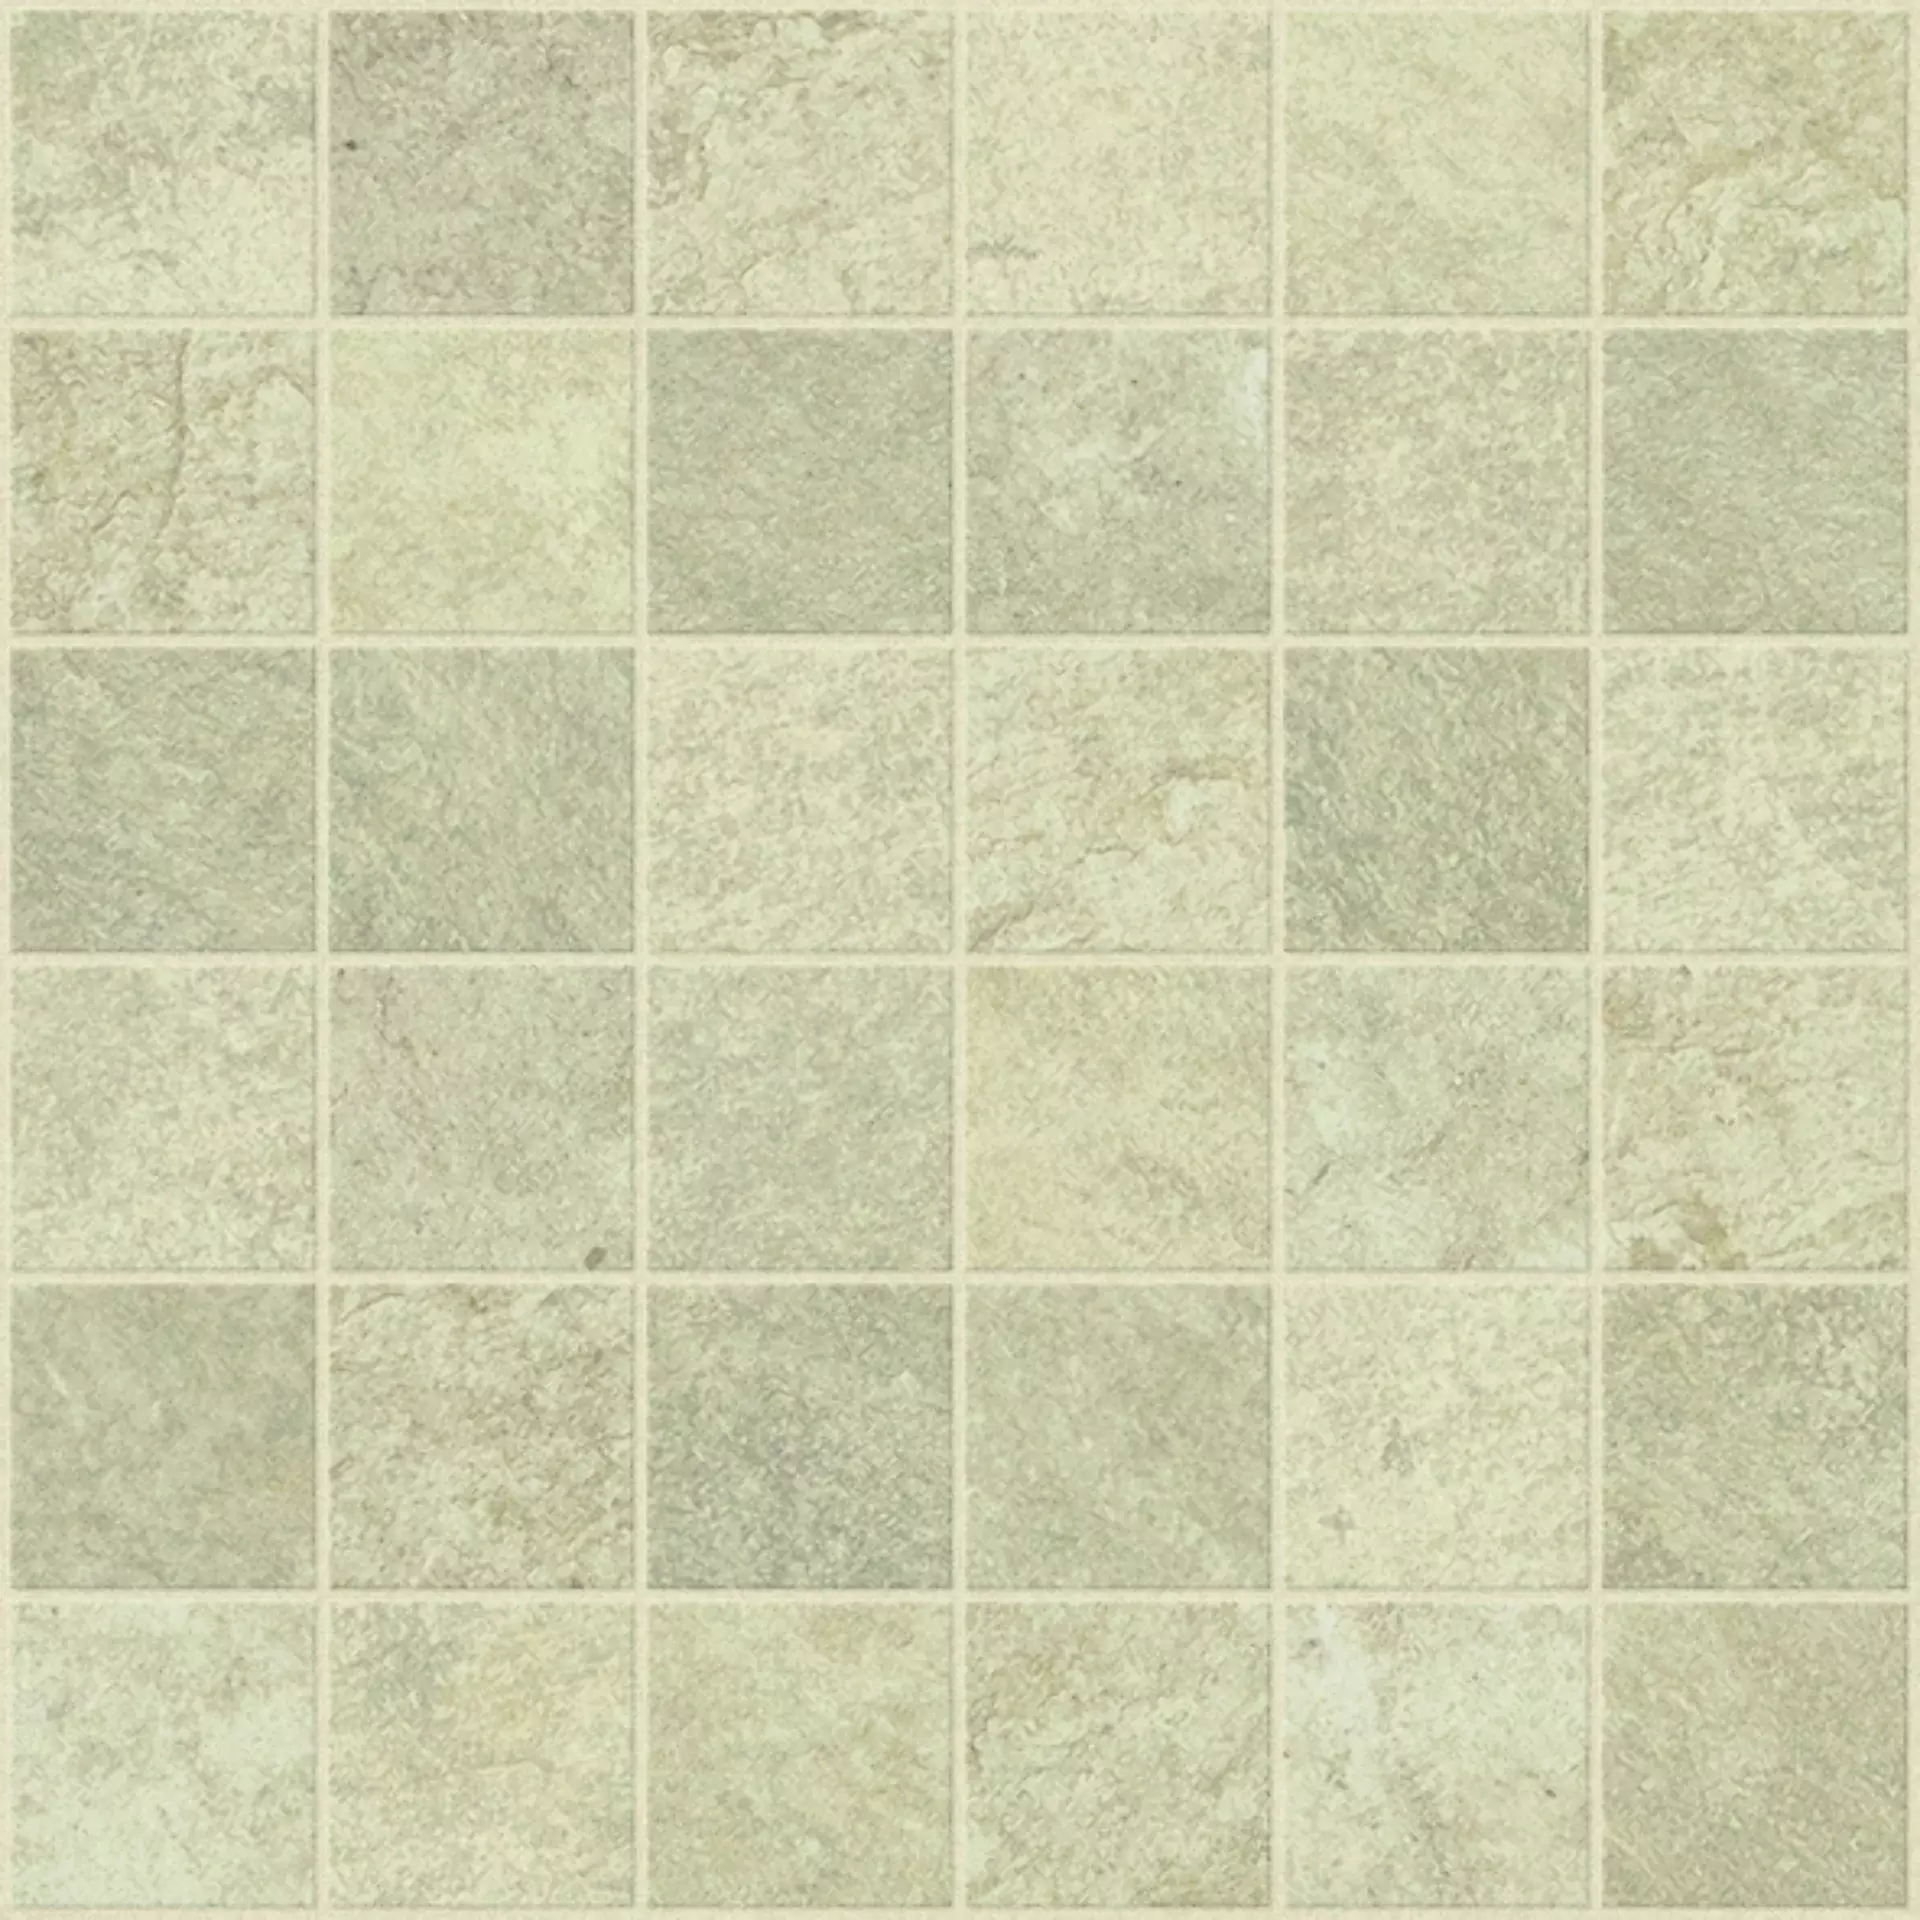 Cercom Absolute Clay Naturale Mosaic 5X5 1076675 30x30cm rectified